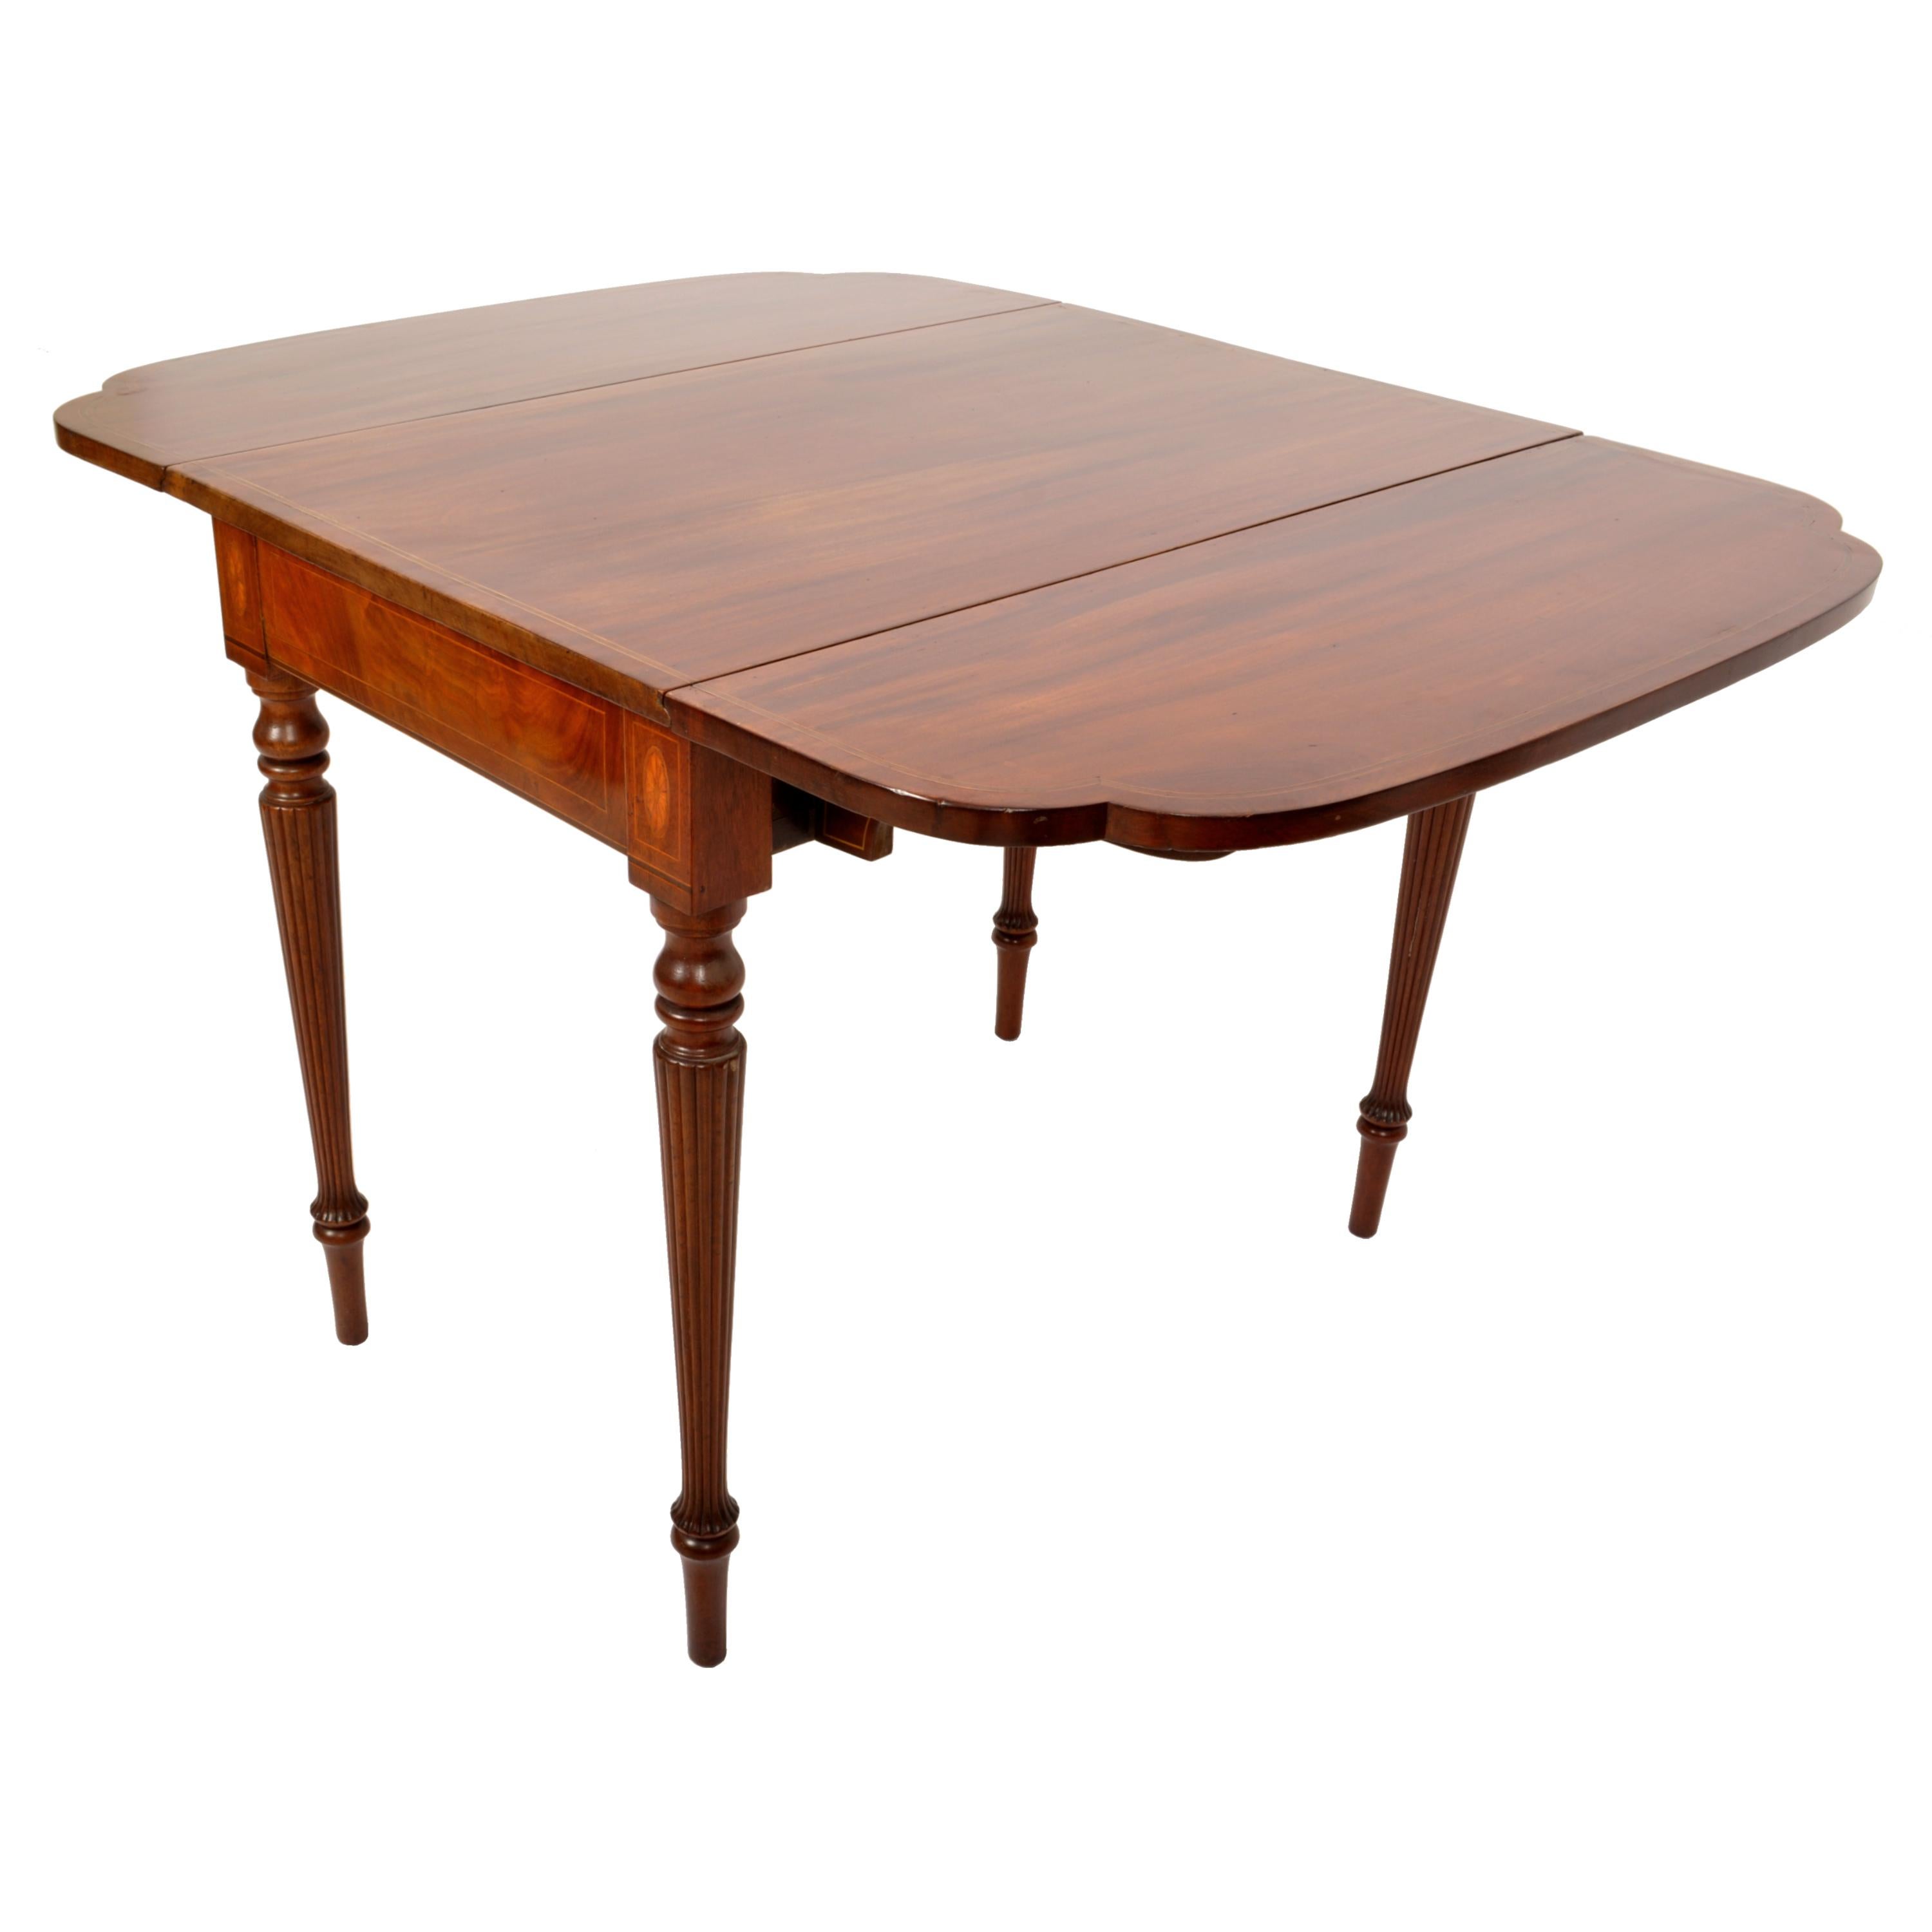 Antique American Federal Sheraton Inlaid Mahogany Pembroke Table New York 1790 For Sale 7